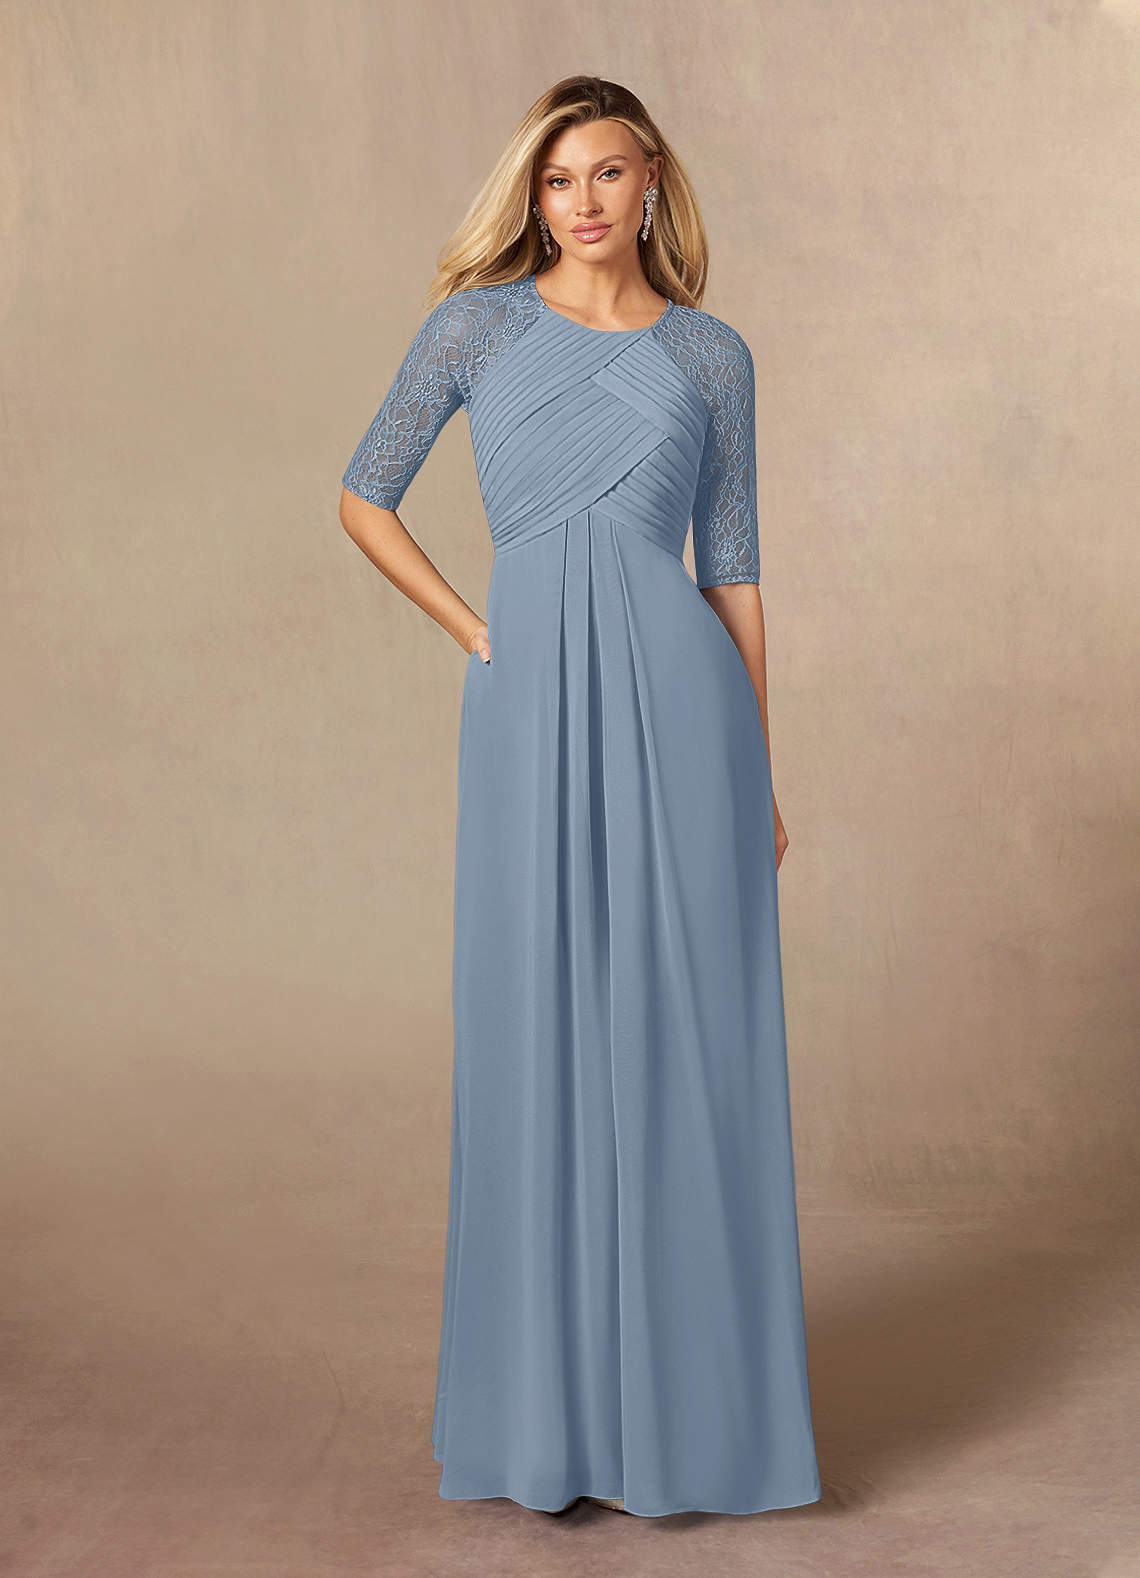 Azazie Barrymore Mother of the Bride Dresses A-Line Scoop lace Chiffon Floor-Length Dress image1